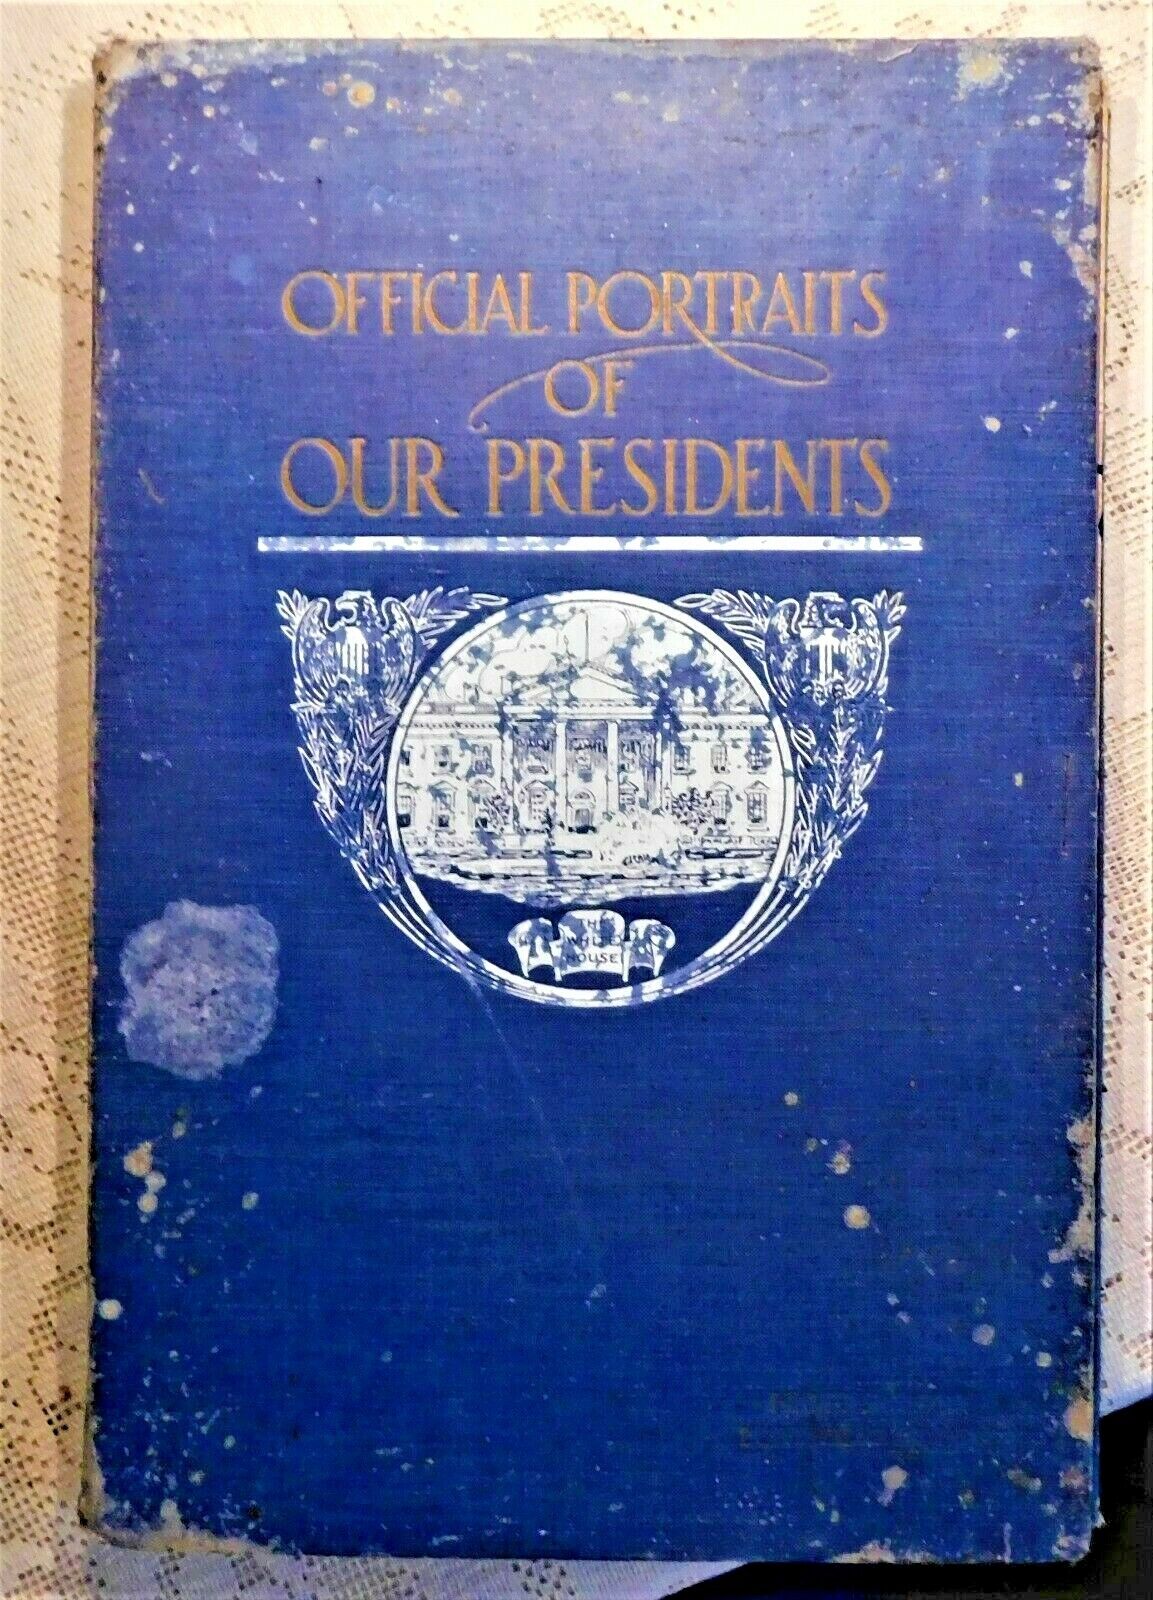 ANTIQUE 1912 EDITION - OFFICIAL PORTRAITS OF OUR PRESIDENTS -  ILLUSTRATED  